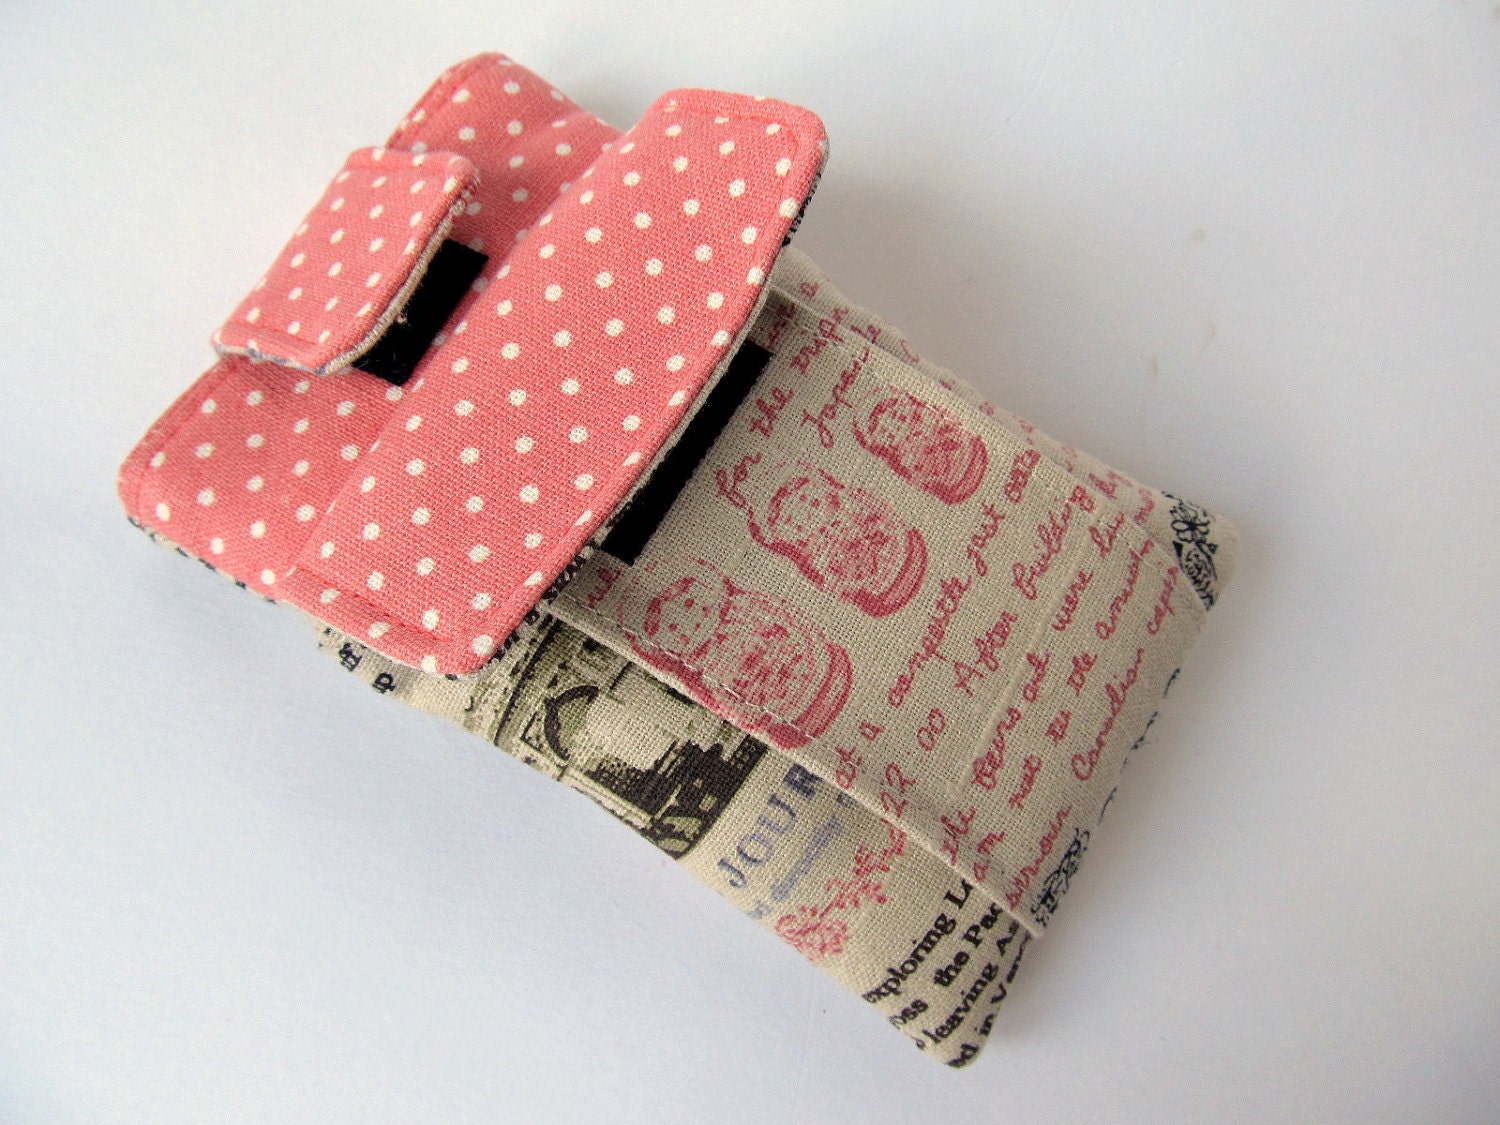 Iphone 4 sleeve iphone 3gs cover ipod case Blackberry sleeve - Retro Russian dolls Paris Manhattan Rome in pink